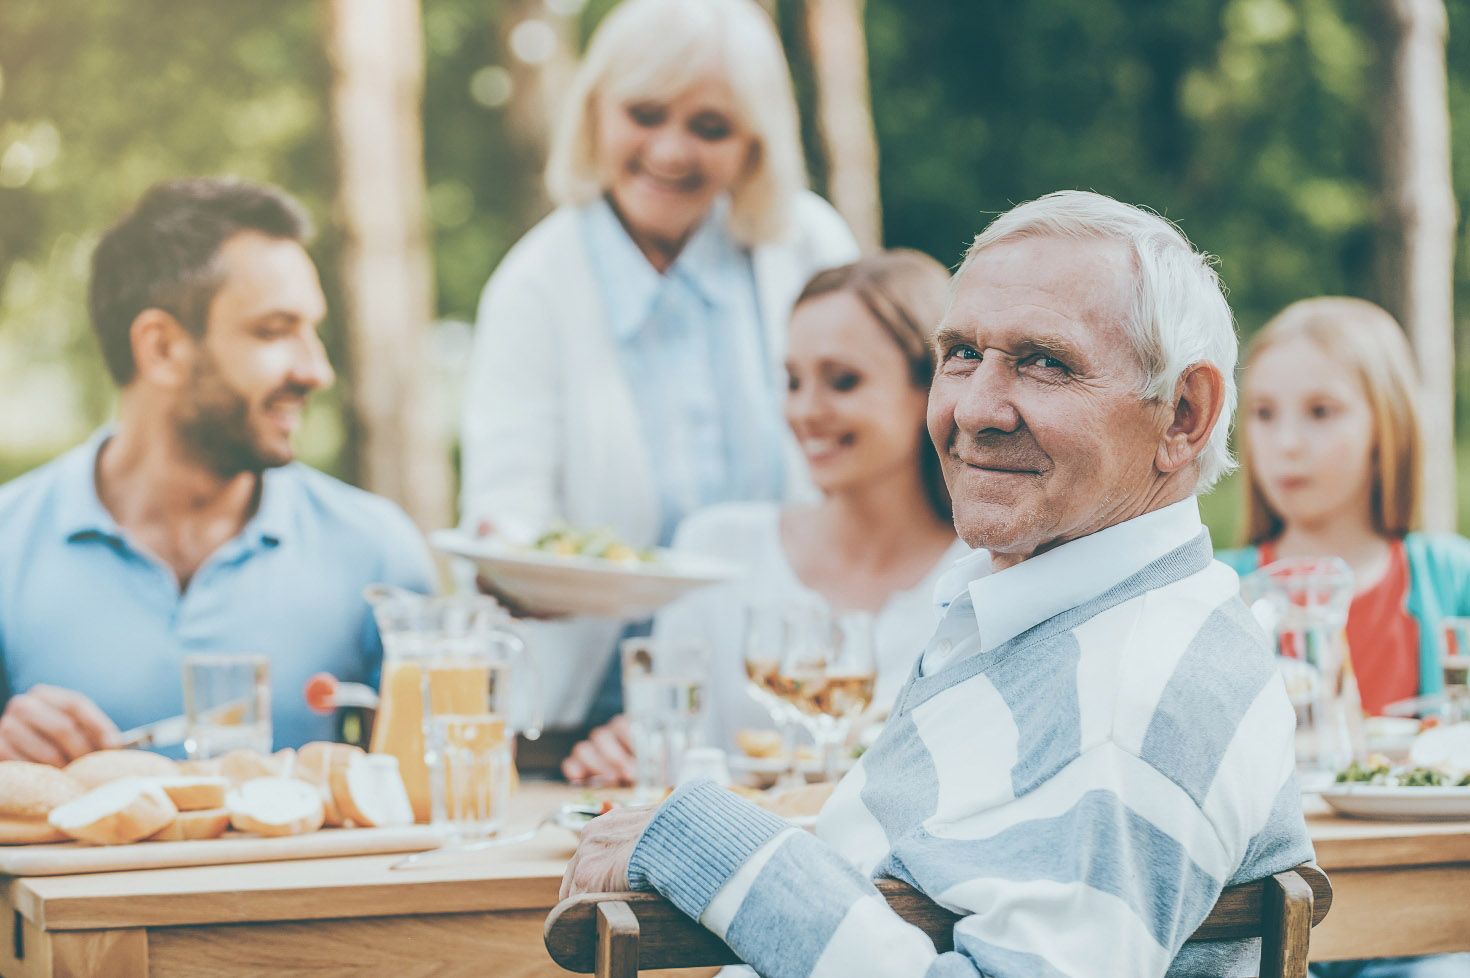 An elderly man enjoying quality time with his loved ones around a table, radiating warmth and togetherness.